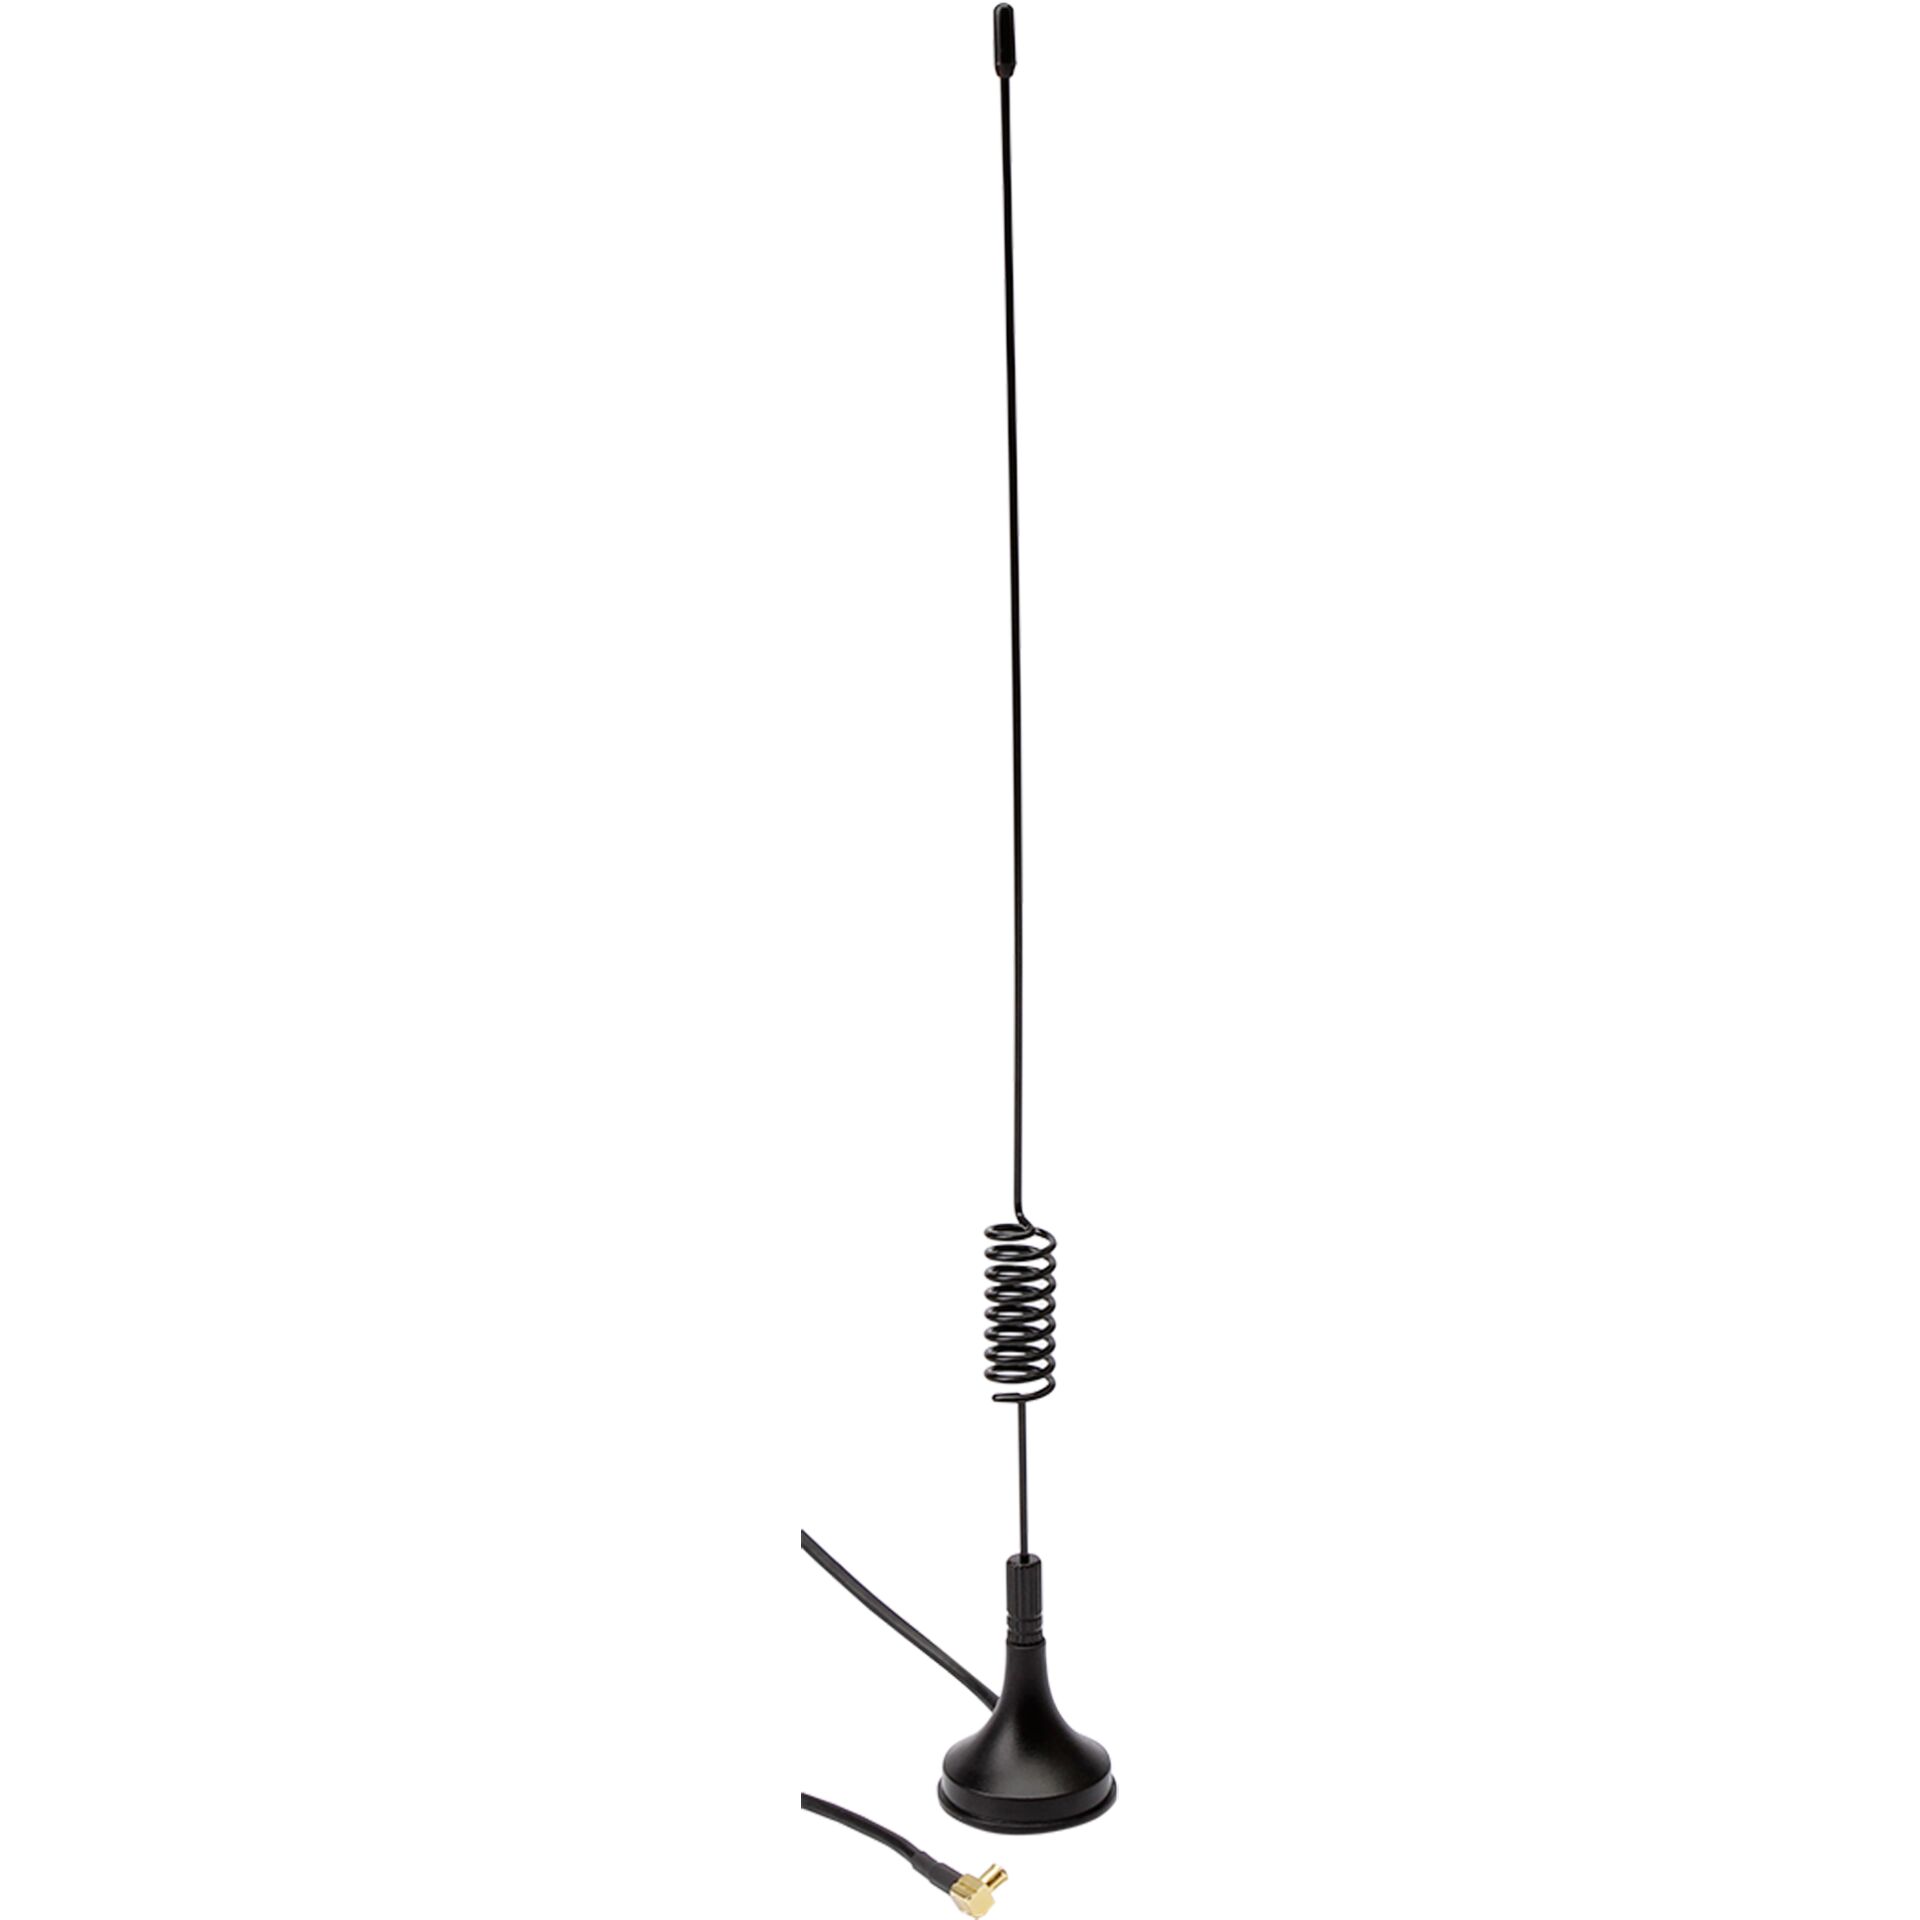 Olympia externe GSM Antenne für Protect 9060 